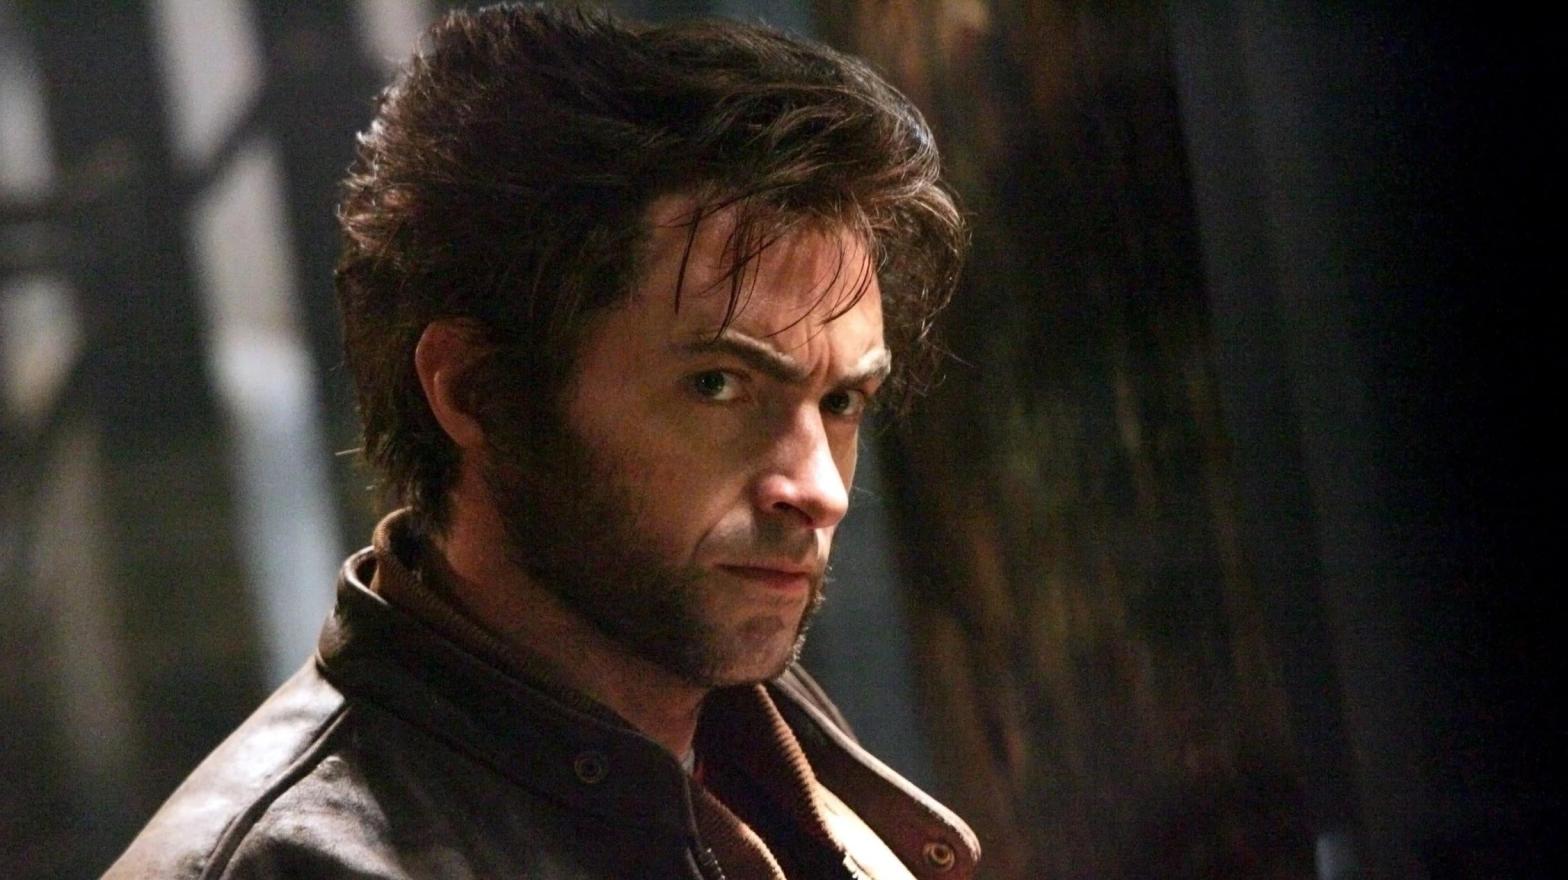 Hugh Jackman's Deadpool 3 Wolverine will be a new spin on the character. (Image: Fox)